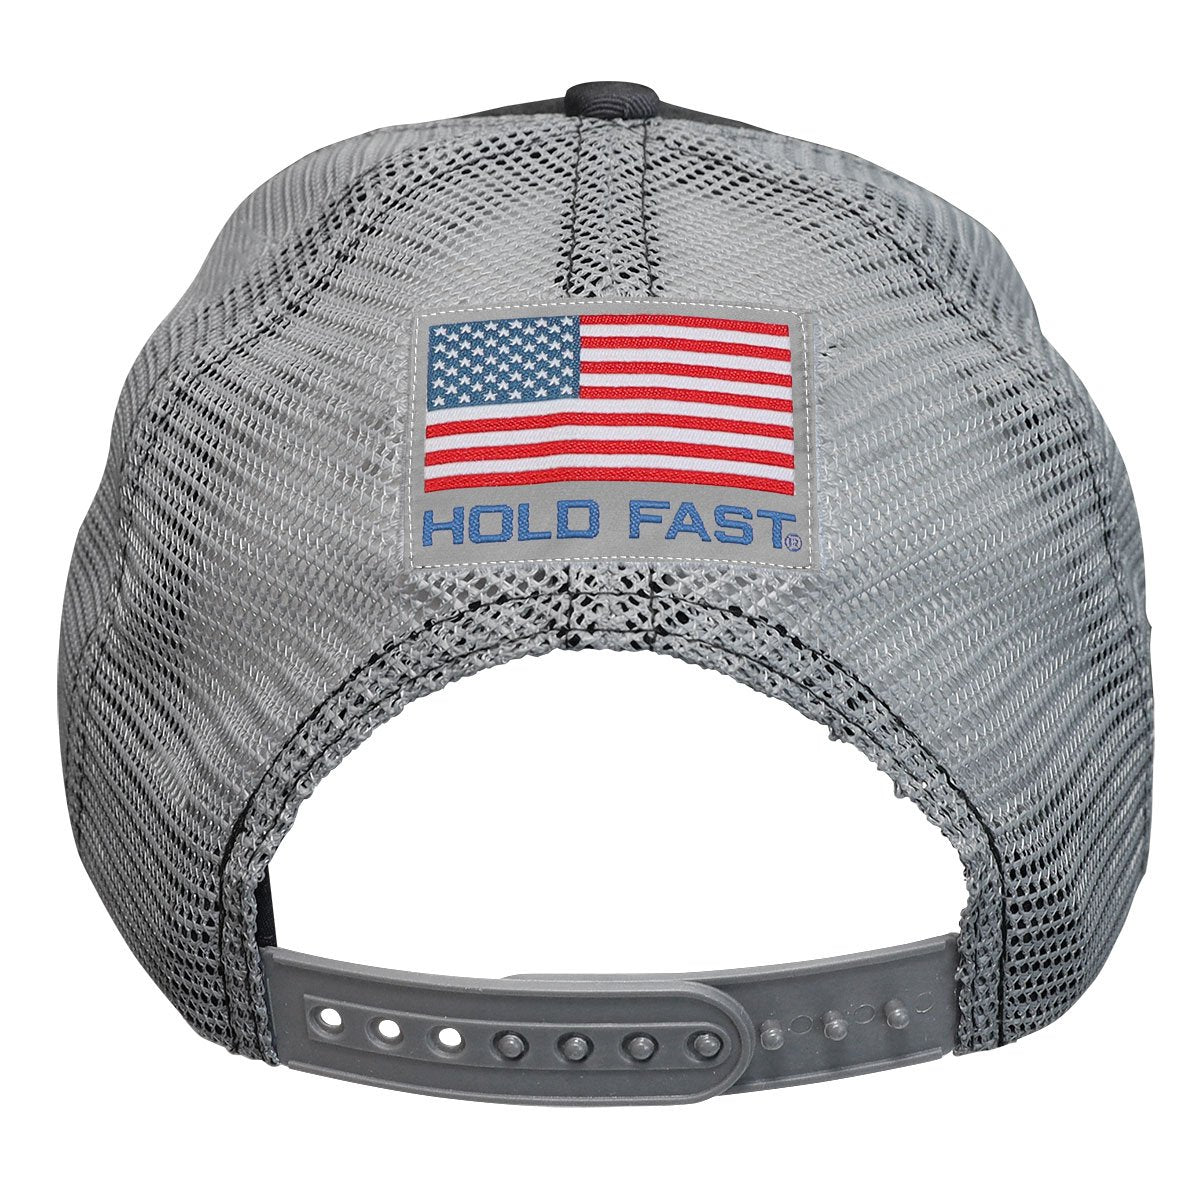 Declare your love of Faith, Family, Freedom in this HOLD FAST™ Cap in Black bill Grey front and a White back. Hold fast to these things so we can celebrate the sacrifice of those who serve in the United States Armed Forces—and ultimately because of the sacrifice of our Lord and Savior, Jesus Christ, on the cross at Calvary. When you pledge allegiance to the flag or see those colors flying in the breeze, think on these things.